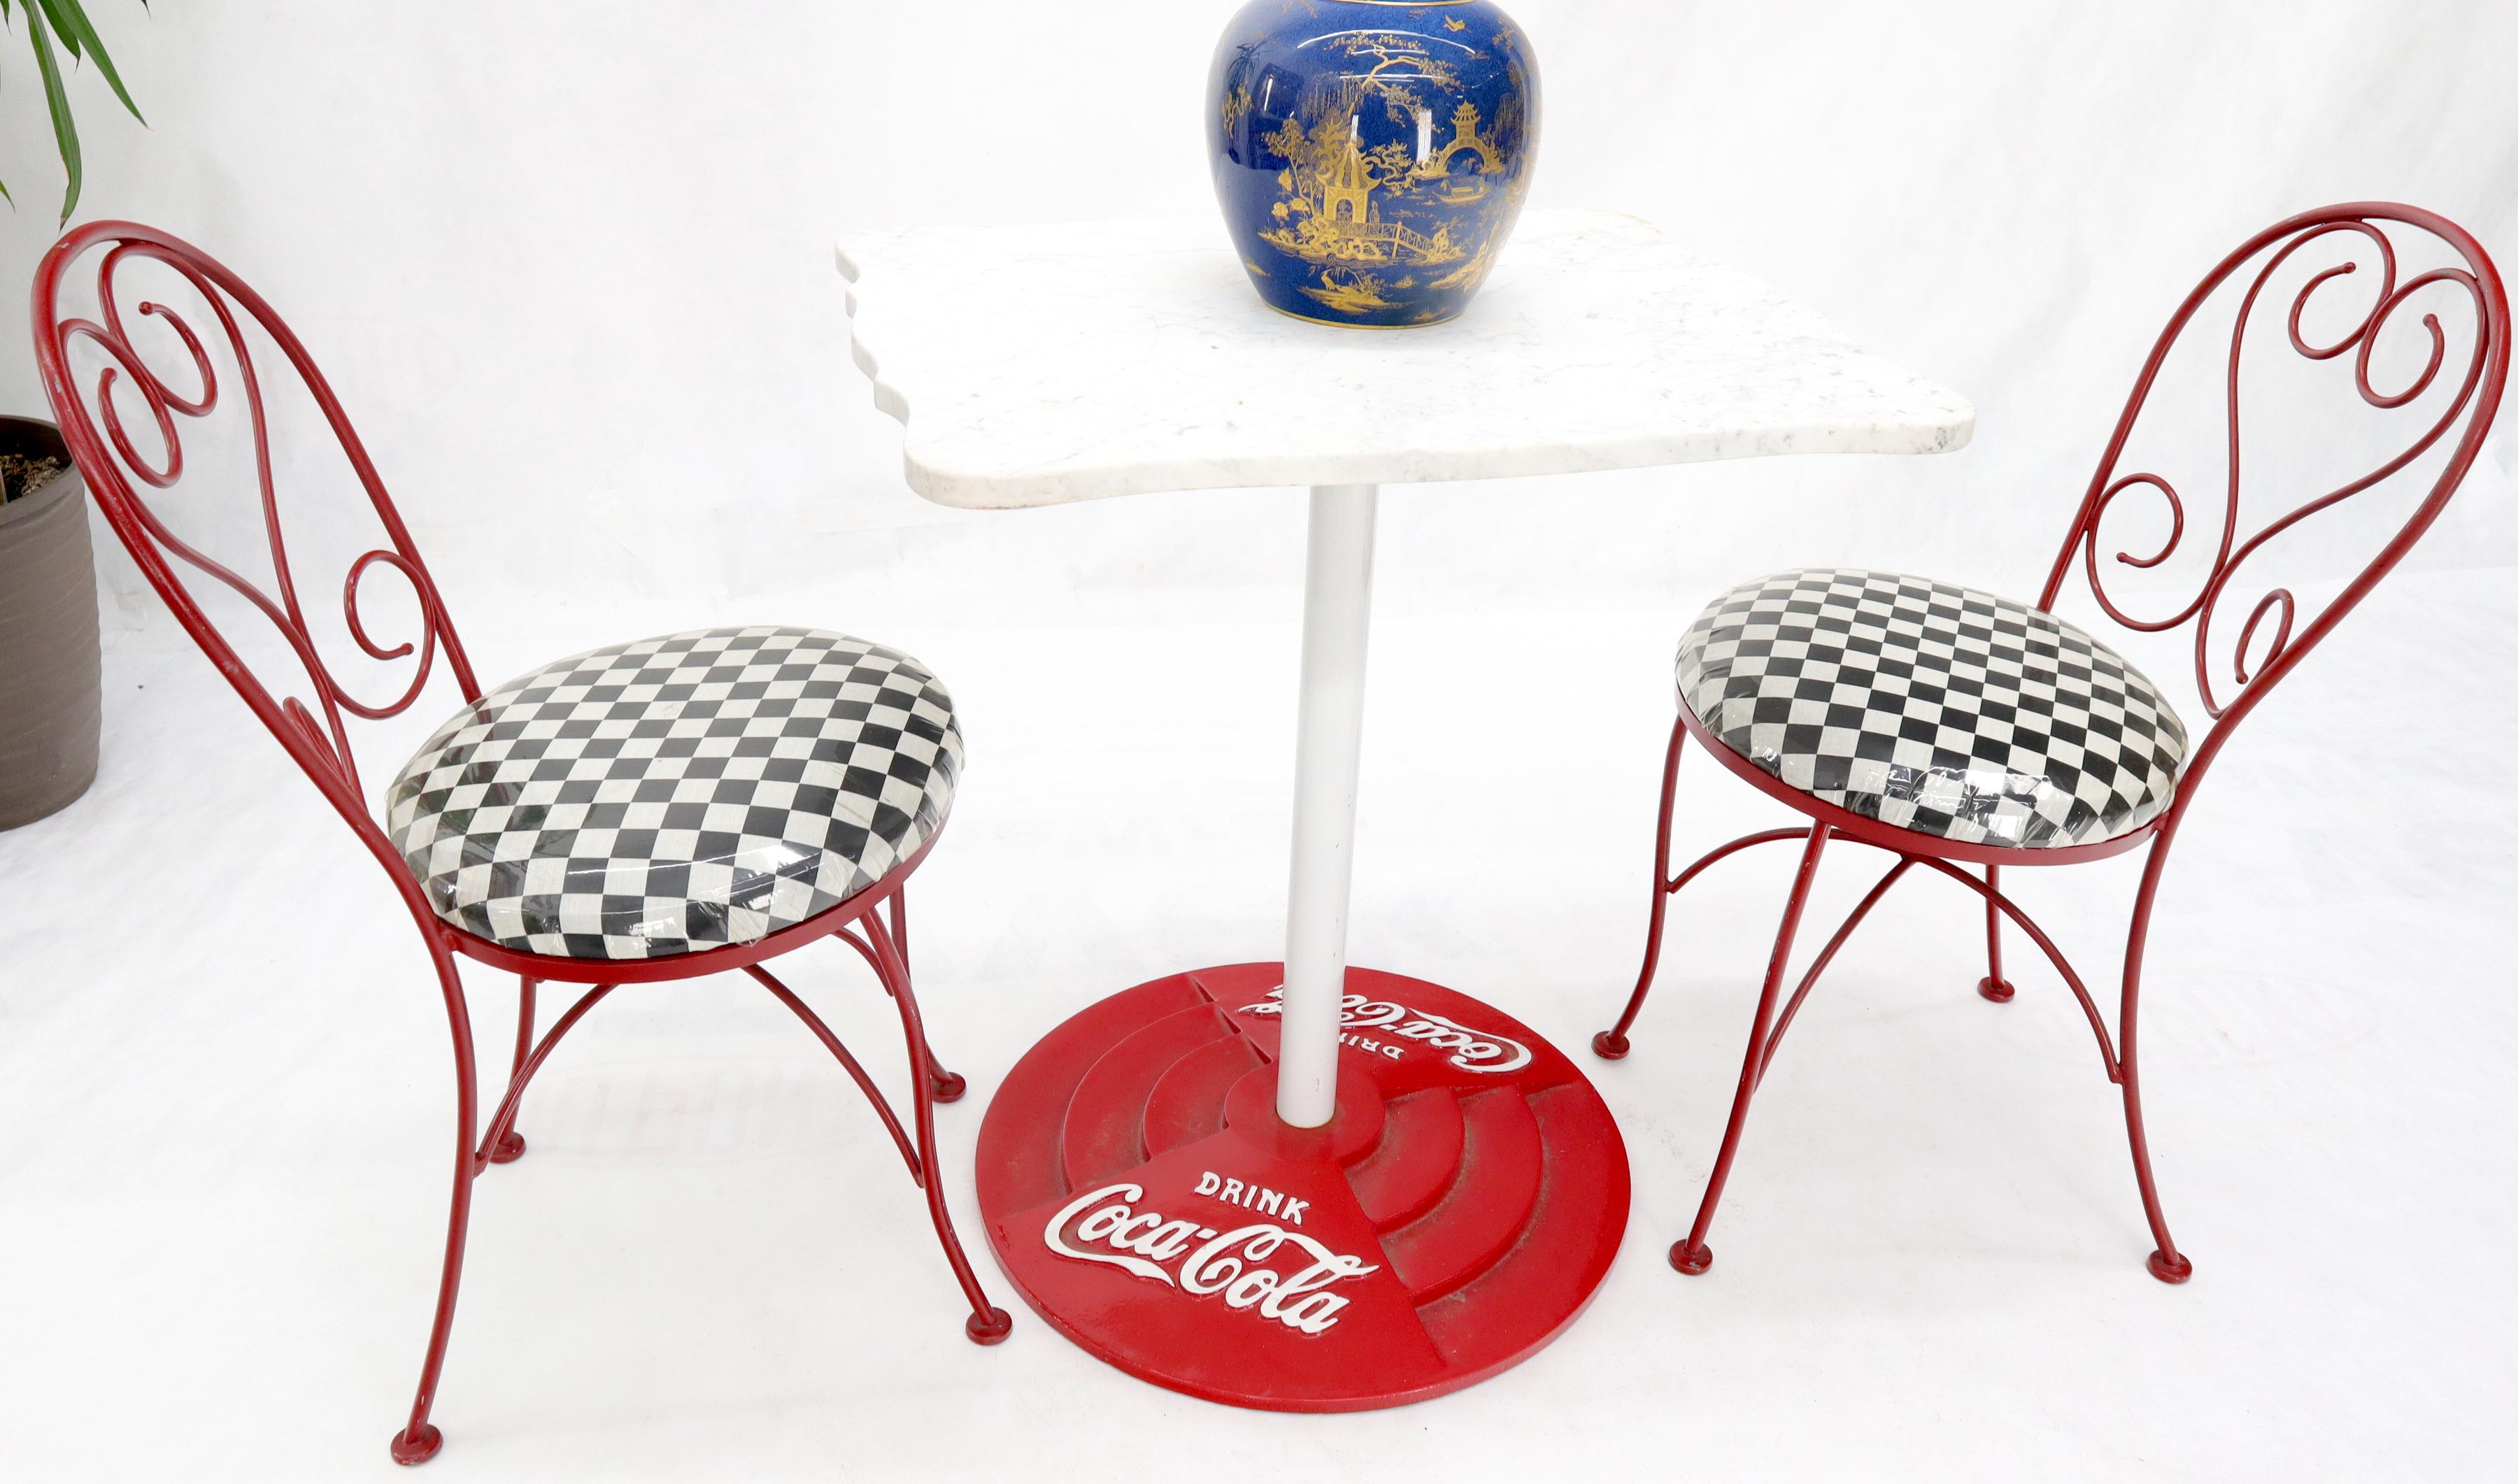 Two Chairs Cast Iron Marble-Top Table Coca-Cola Dinette Ice Cream Set Cafe Table In Good Condition For Sale In Rockaway, NJ